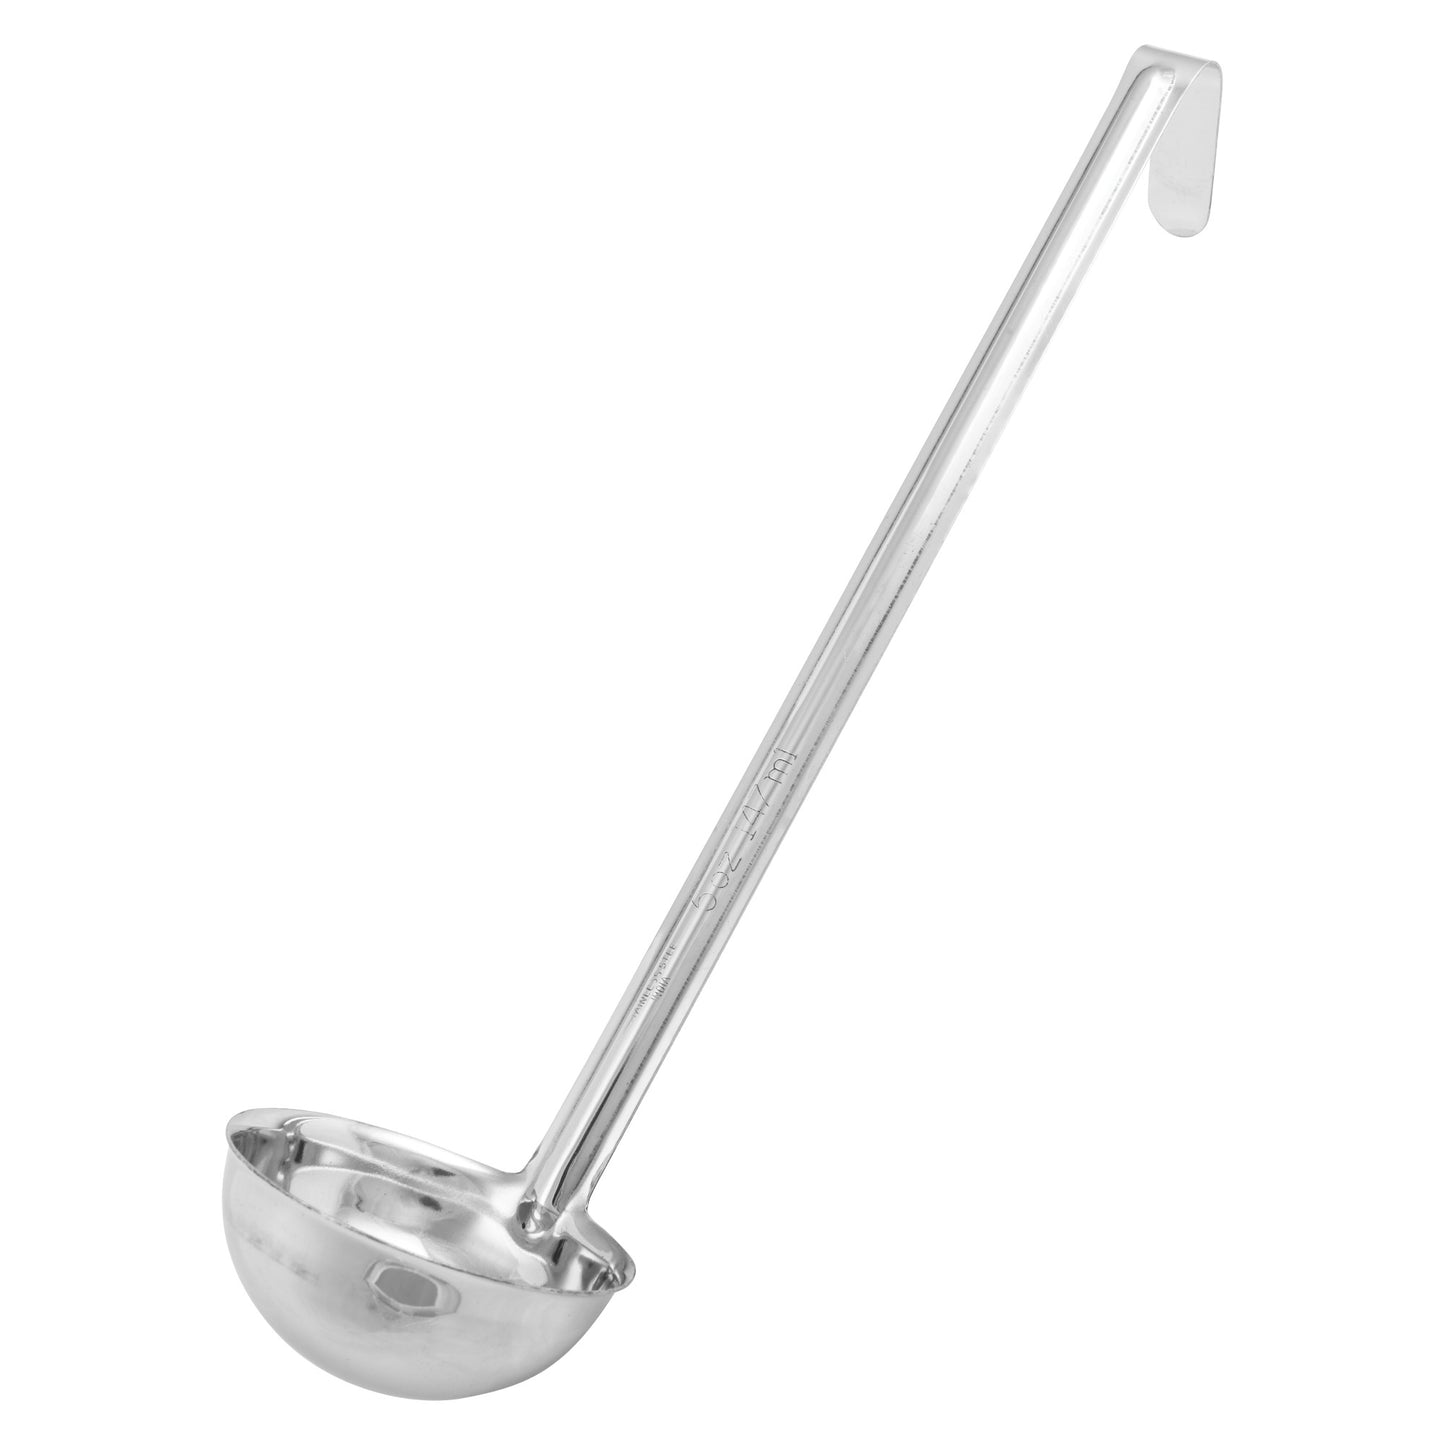 LDIN-5 - Winco Prime One-Piece Ladle, Stainless Steel - 5 oz